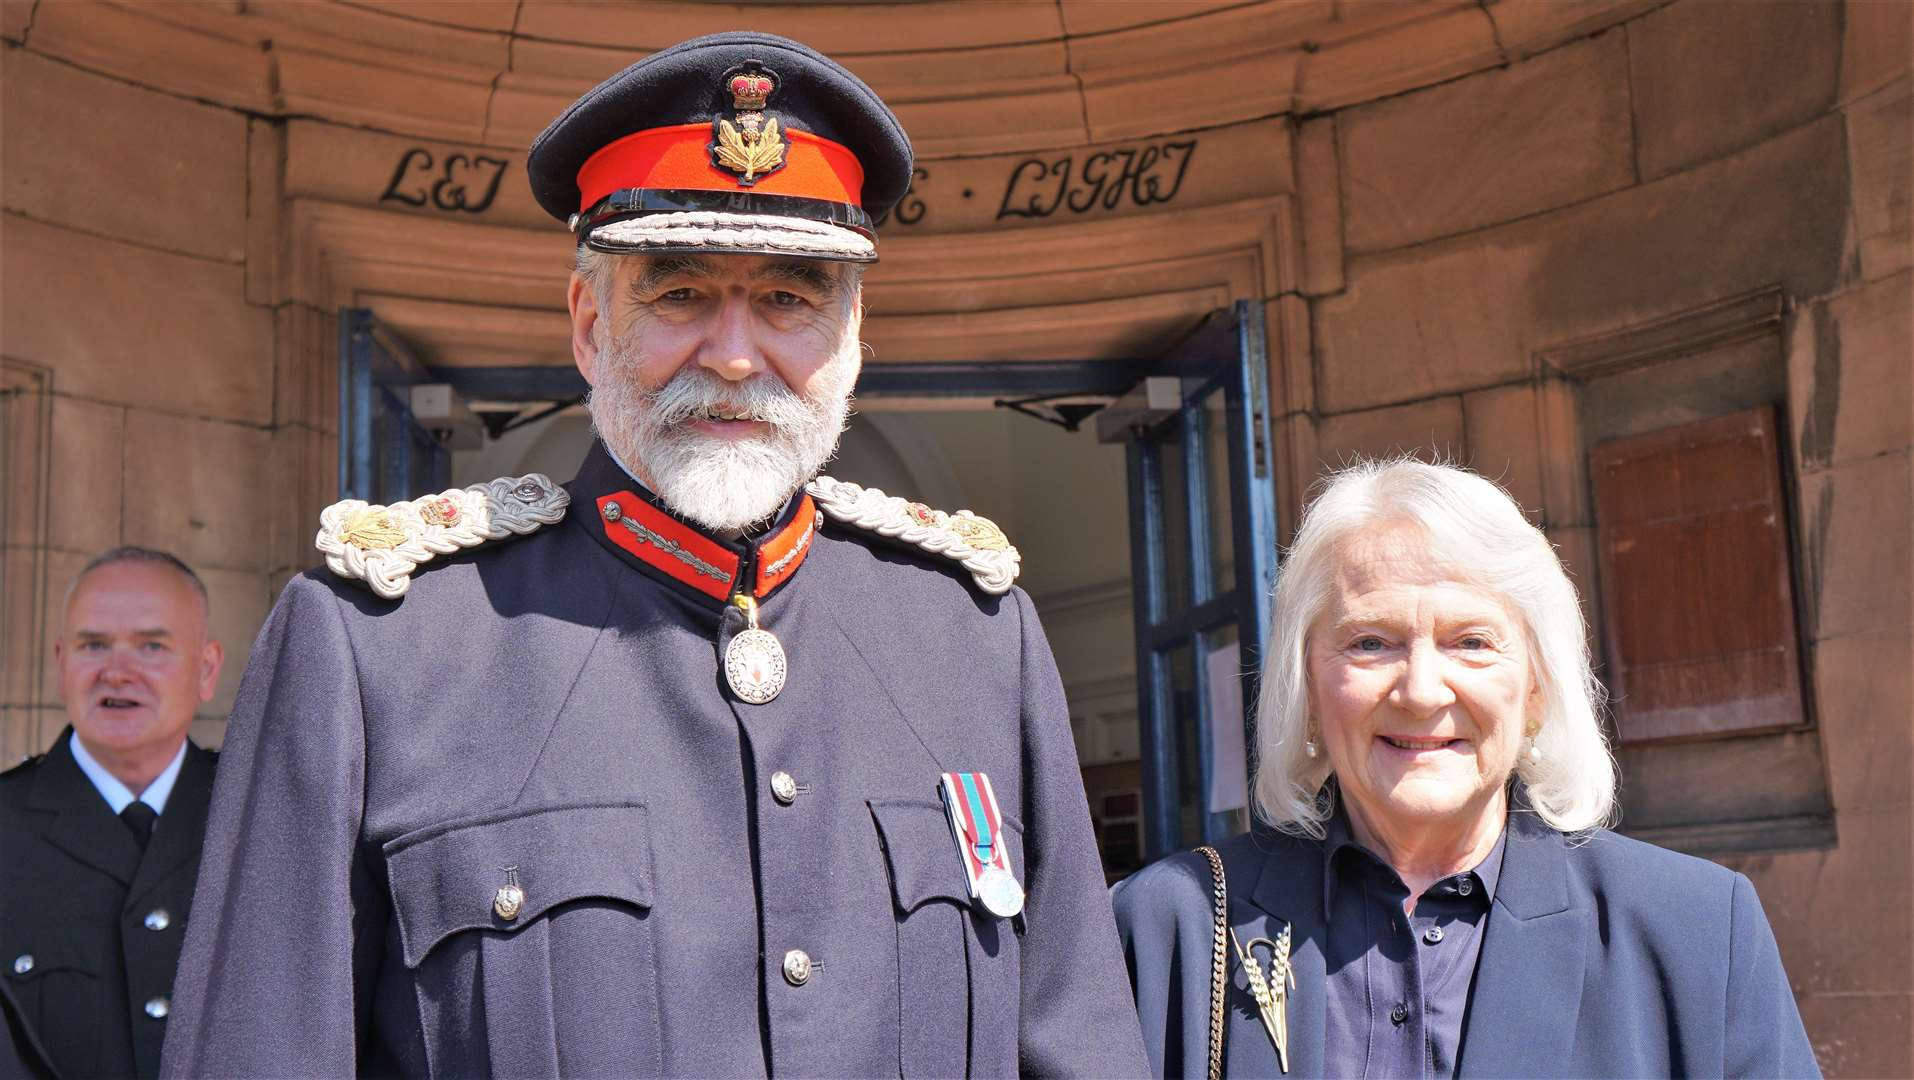 Lord and Lady Thurso were part of the welcoming committee for the royal visit on Friday afternoon. Picture: DGS